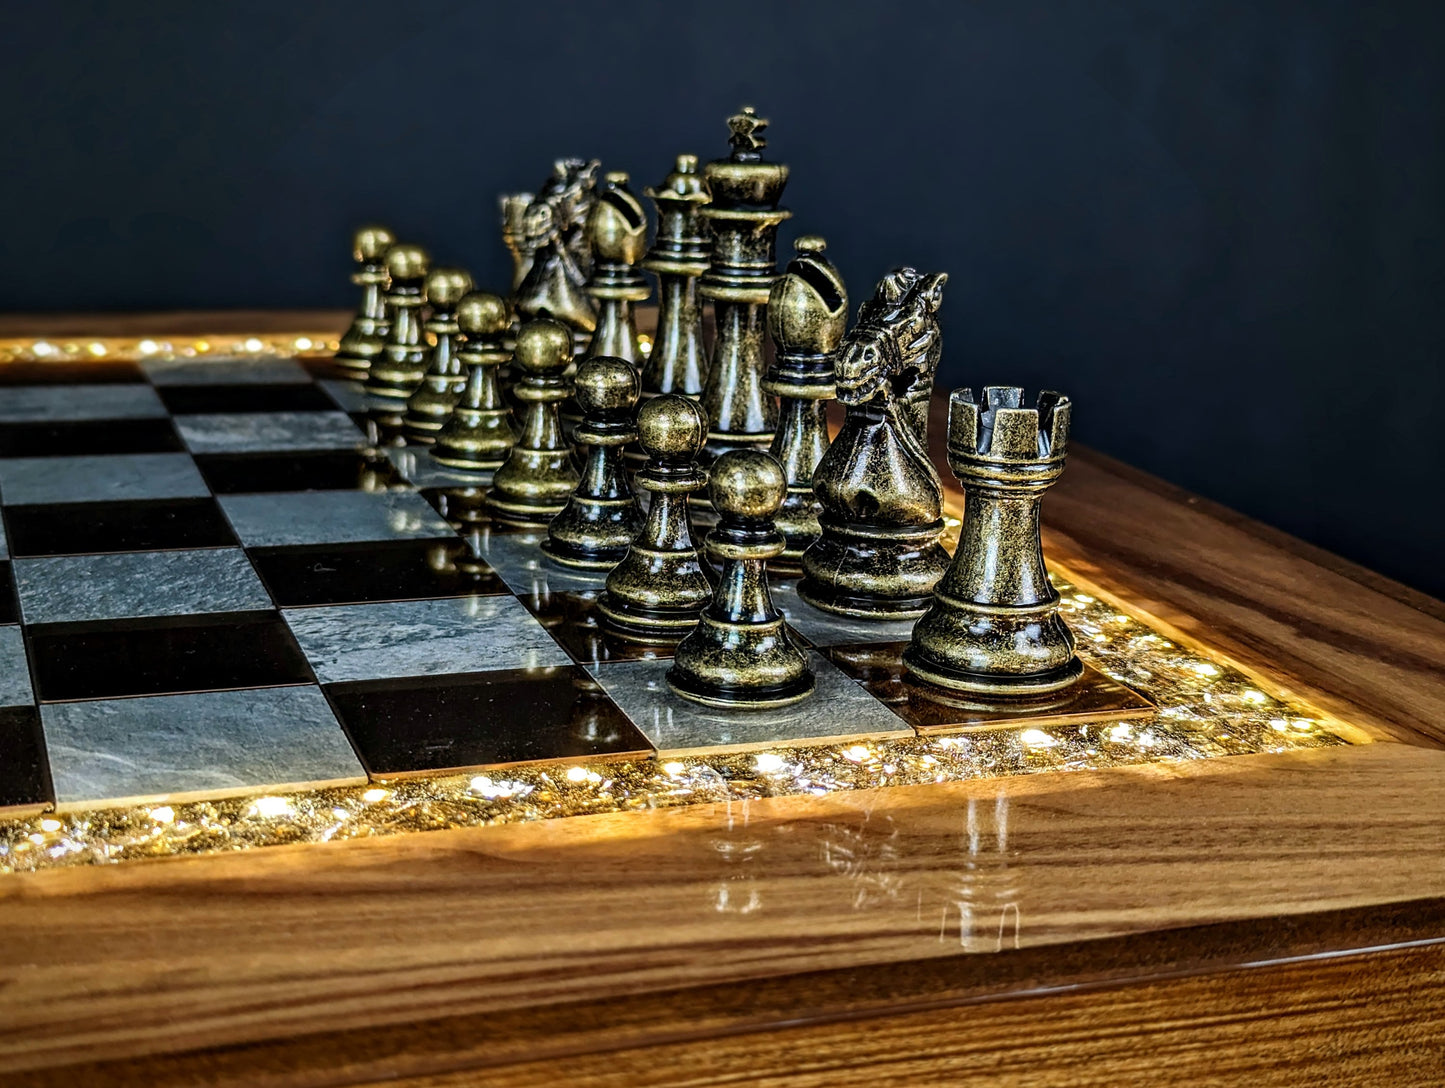 The Rook (Walnut) Chess Table - Ceramic Tile LED Illuminated Resin Solid Wood Table, Handmade Artisan Chess Pedestal Game Table